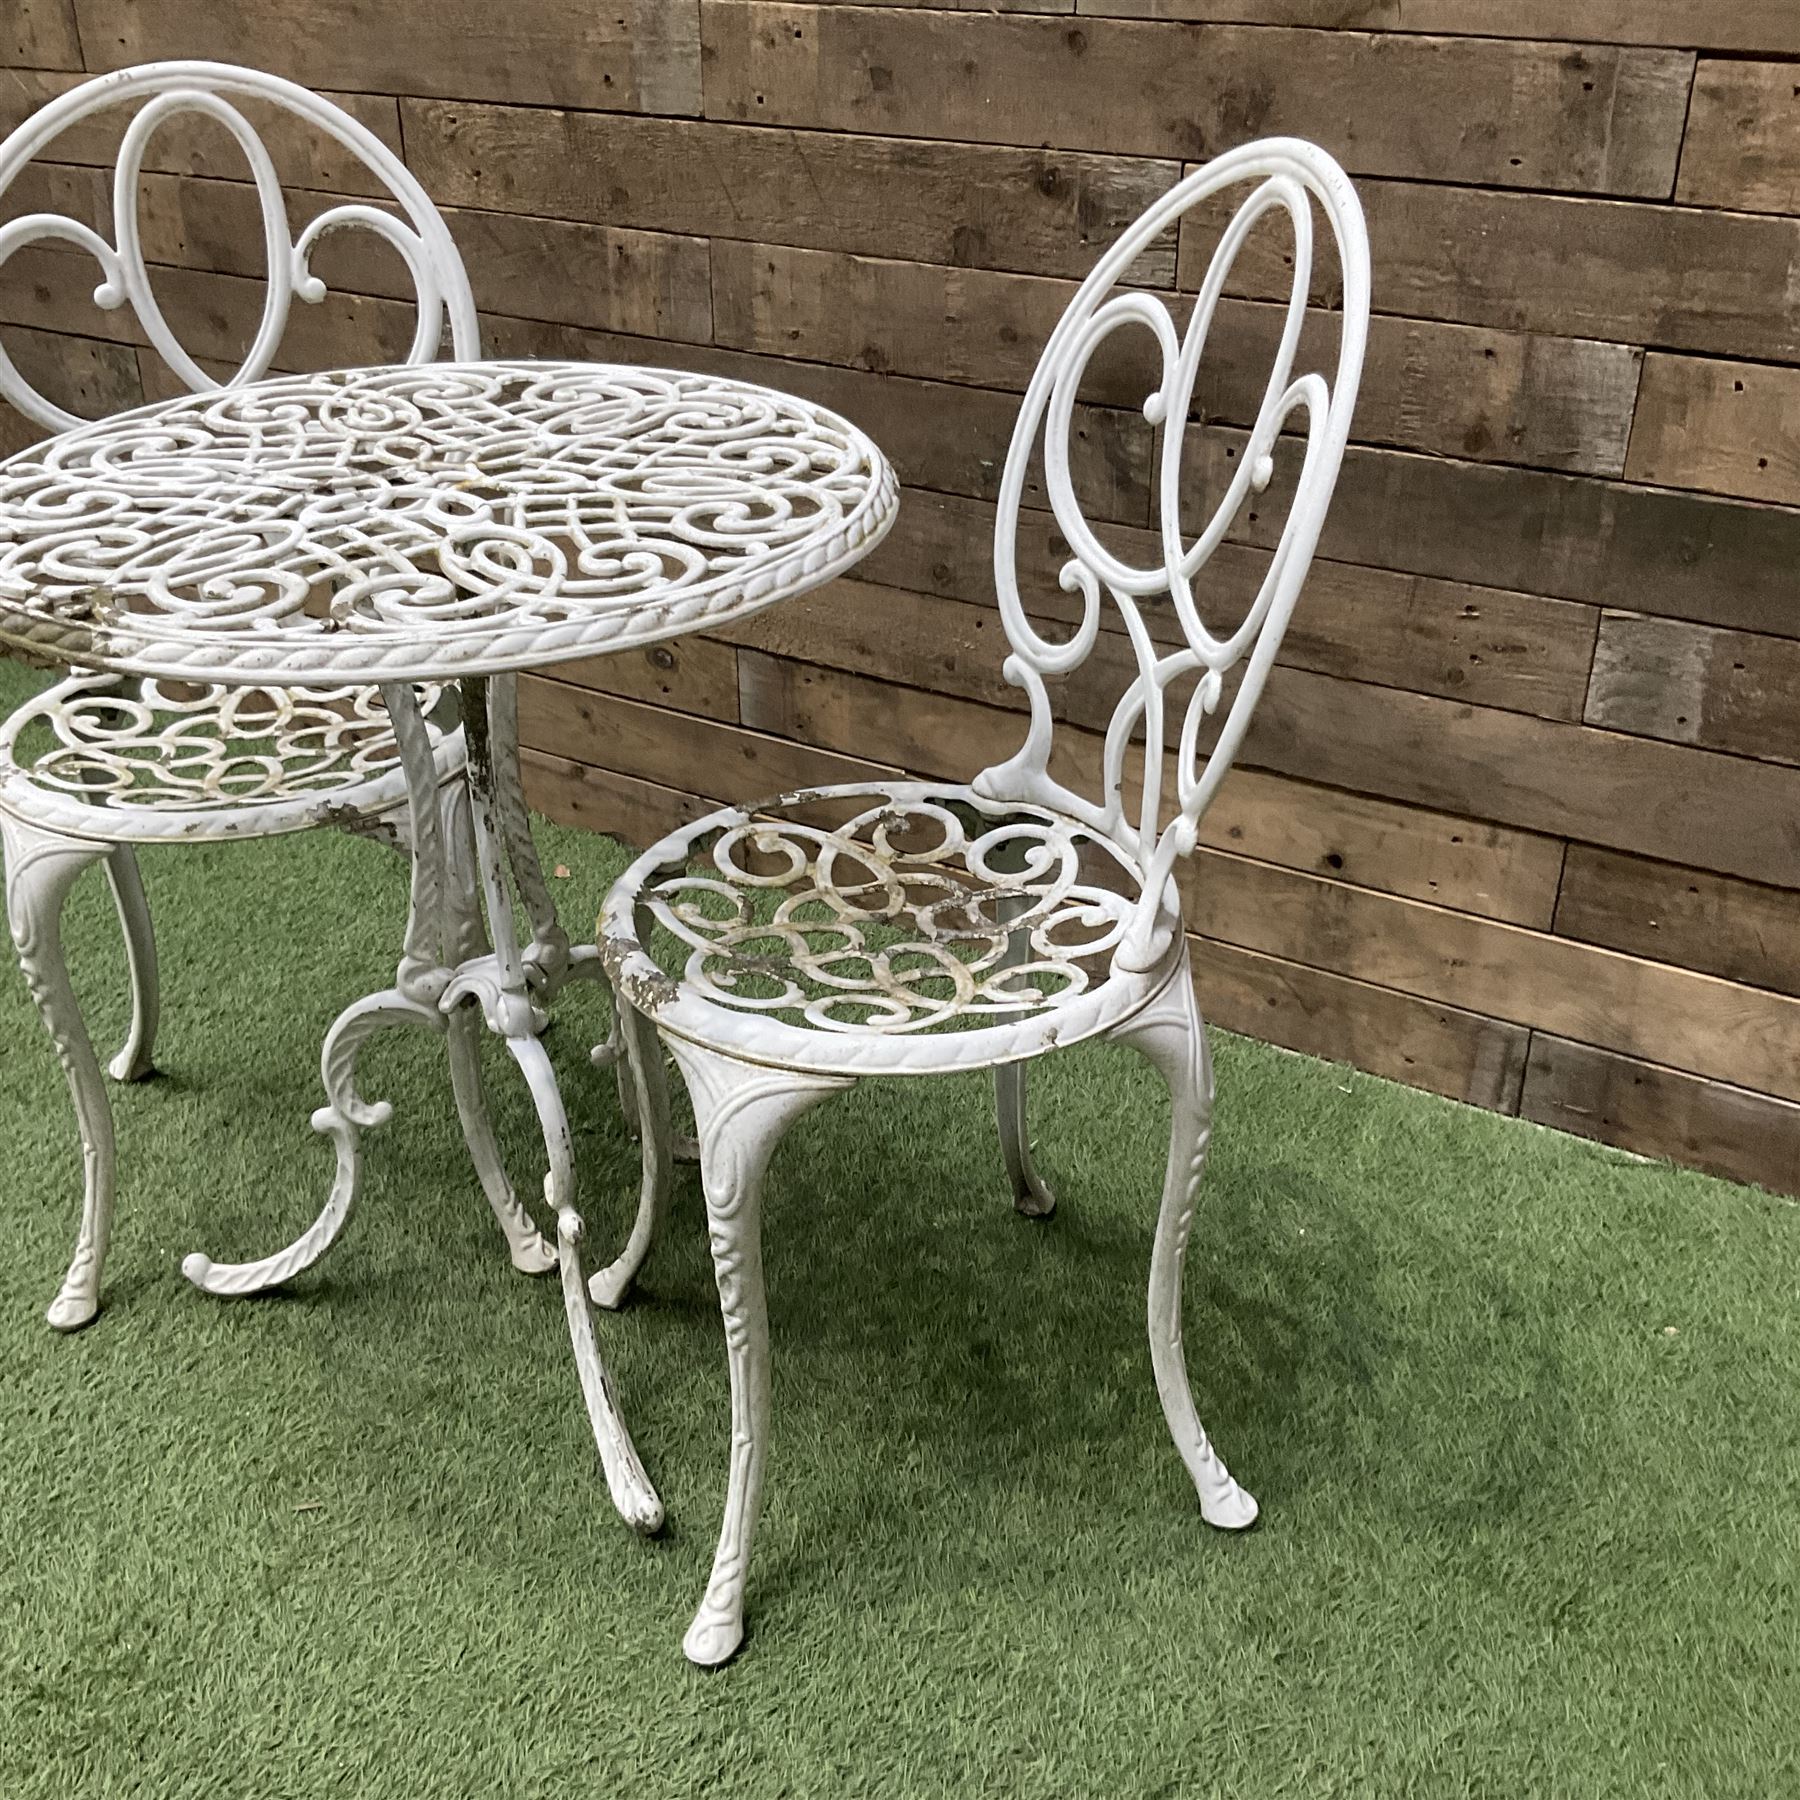 Cast aluminium garden table and two chairs painted in white - Image 2 of 3